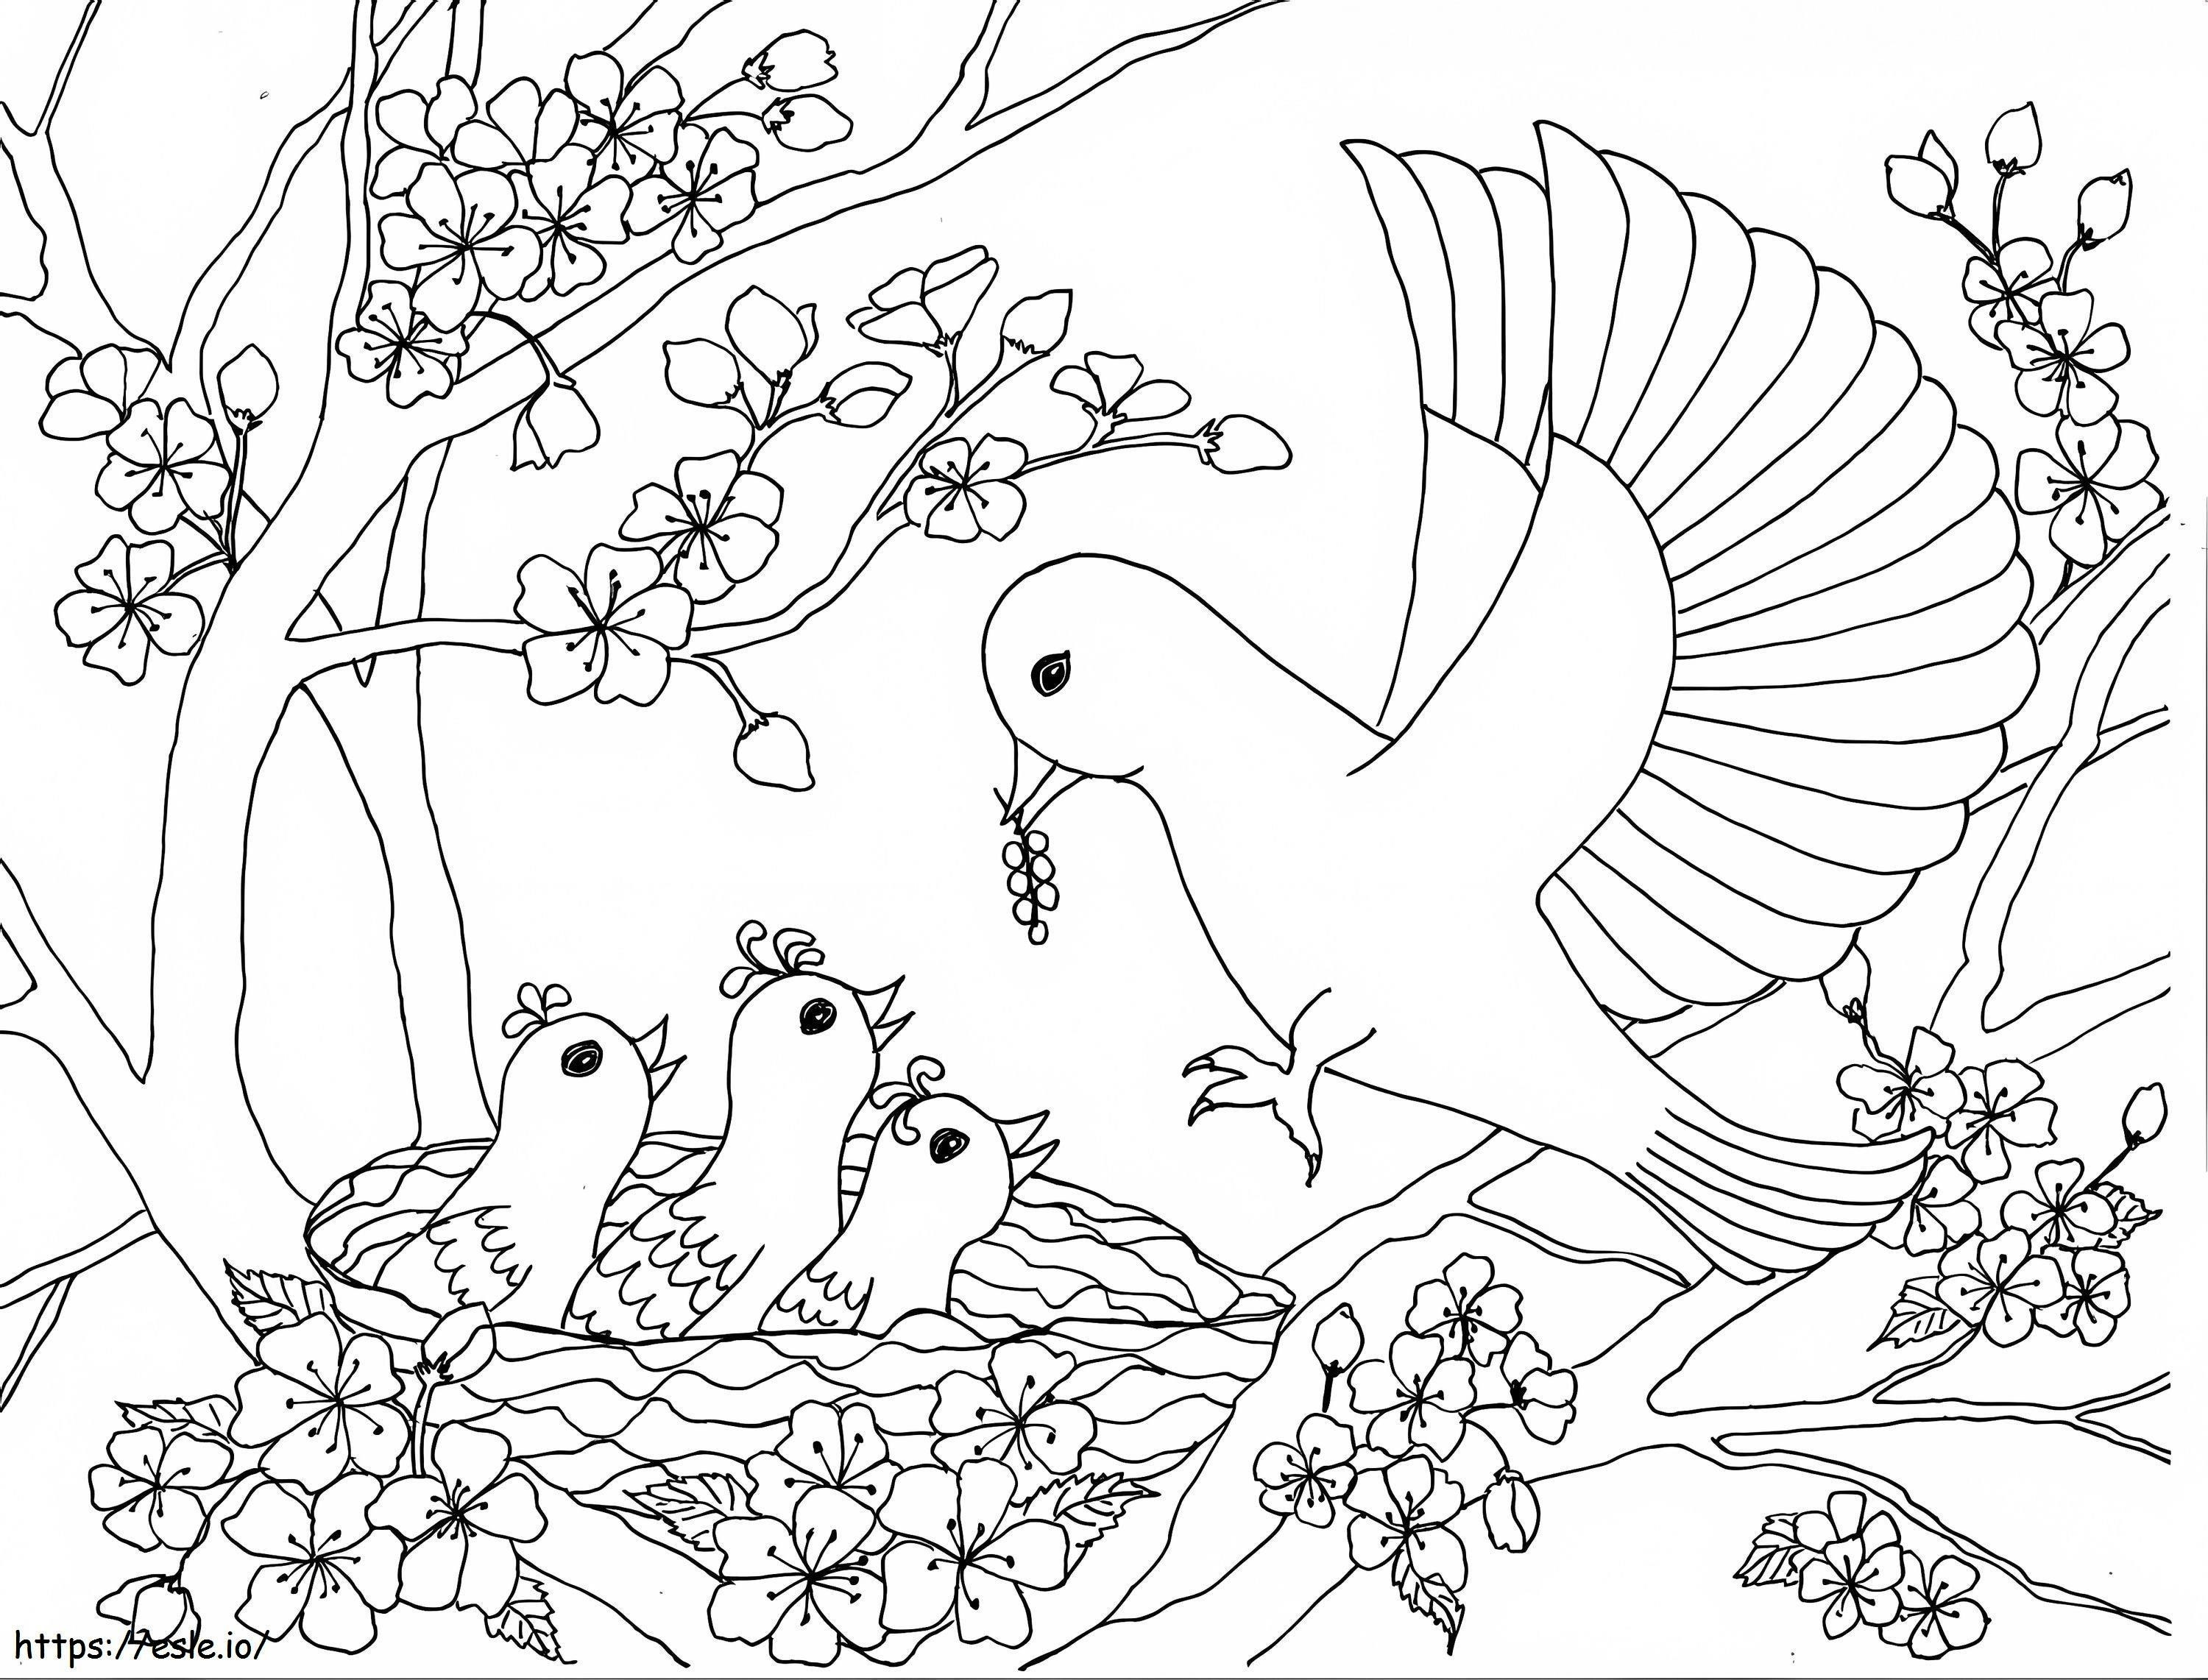 Bird Family On The Cherry Blossom Tree coloring page